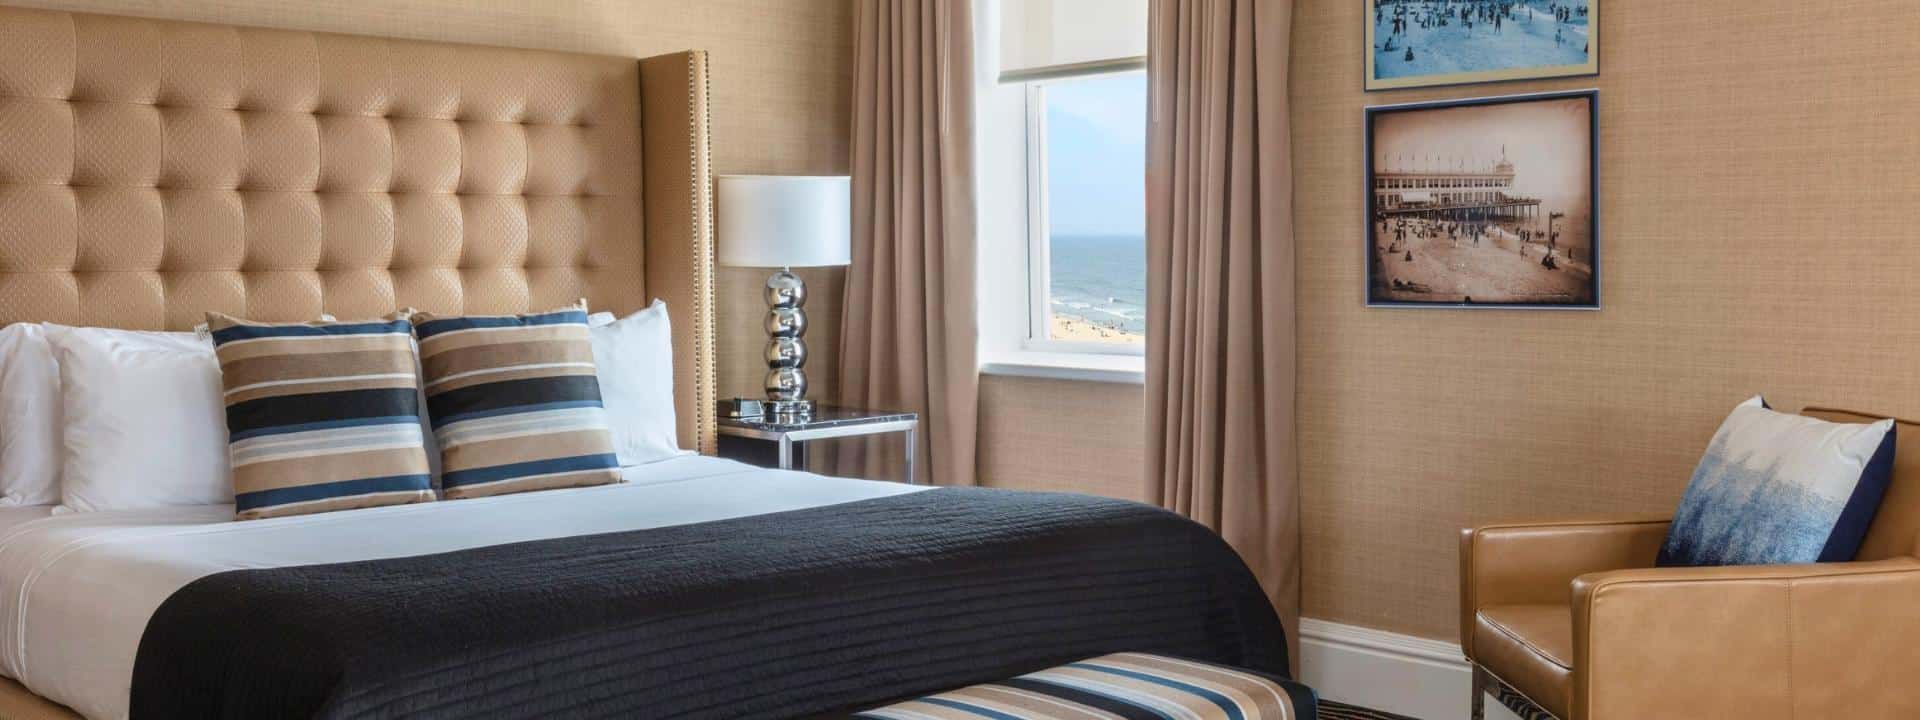 Ocean View Rooms and Suites at Berkeley Hotel Asbury Park New Jersey